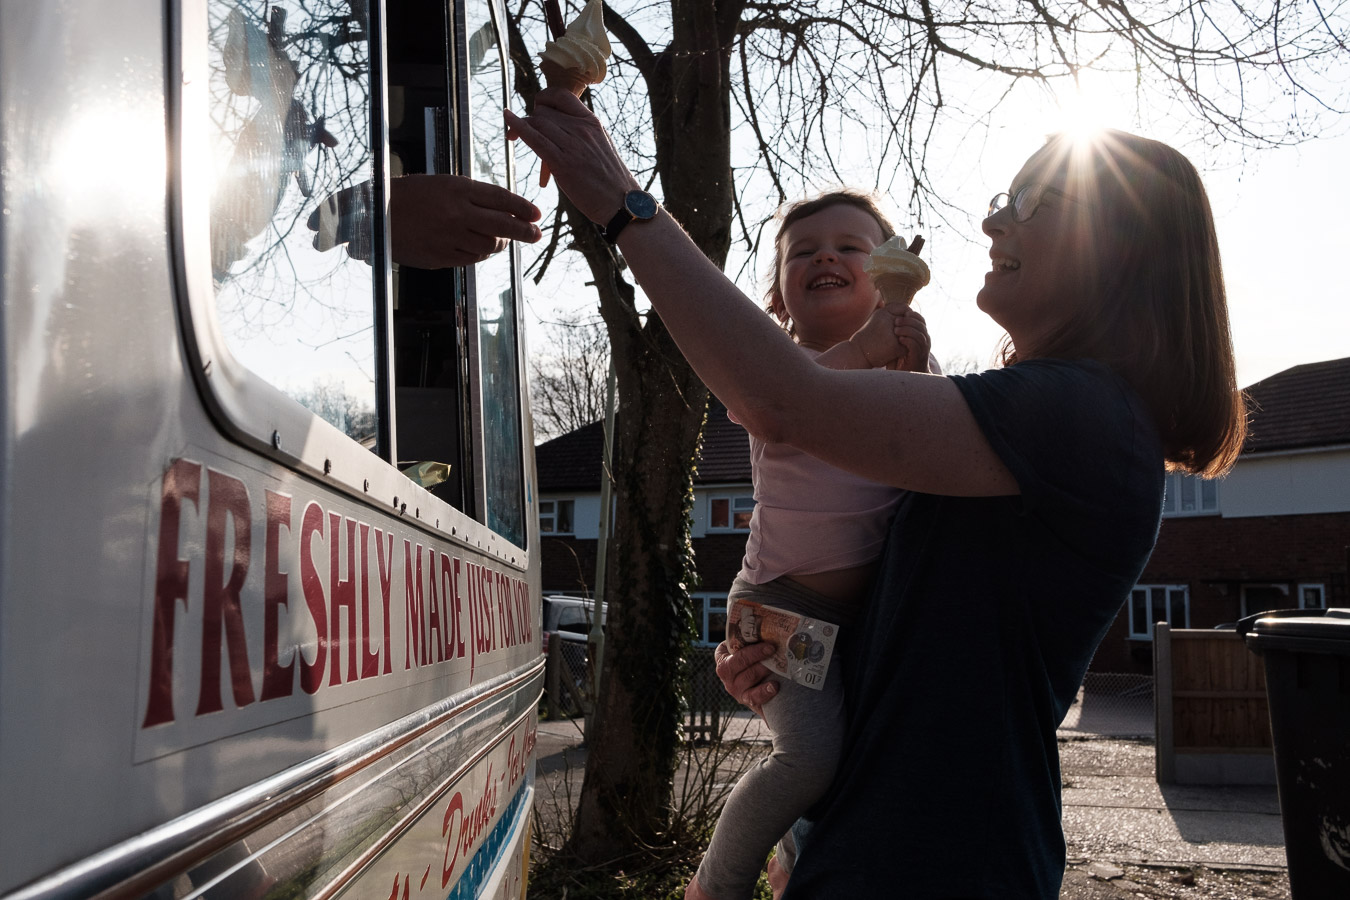 mum and daughter buy an ice cream from a van parked by their house.